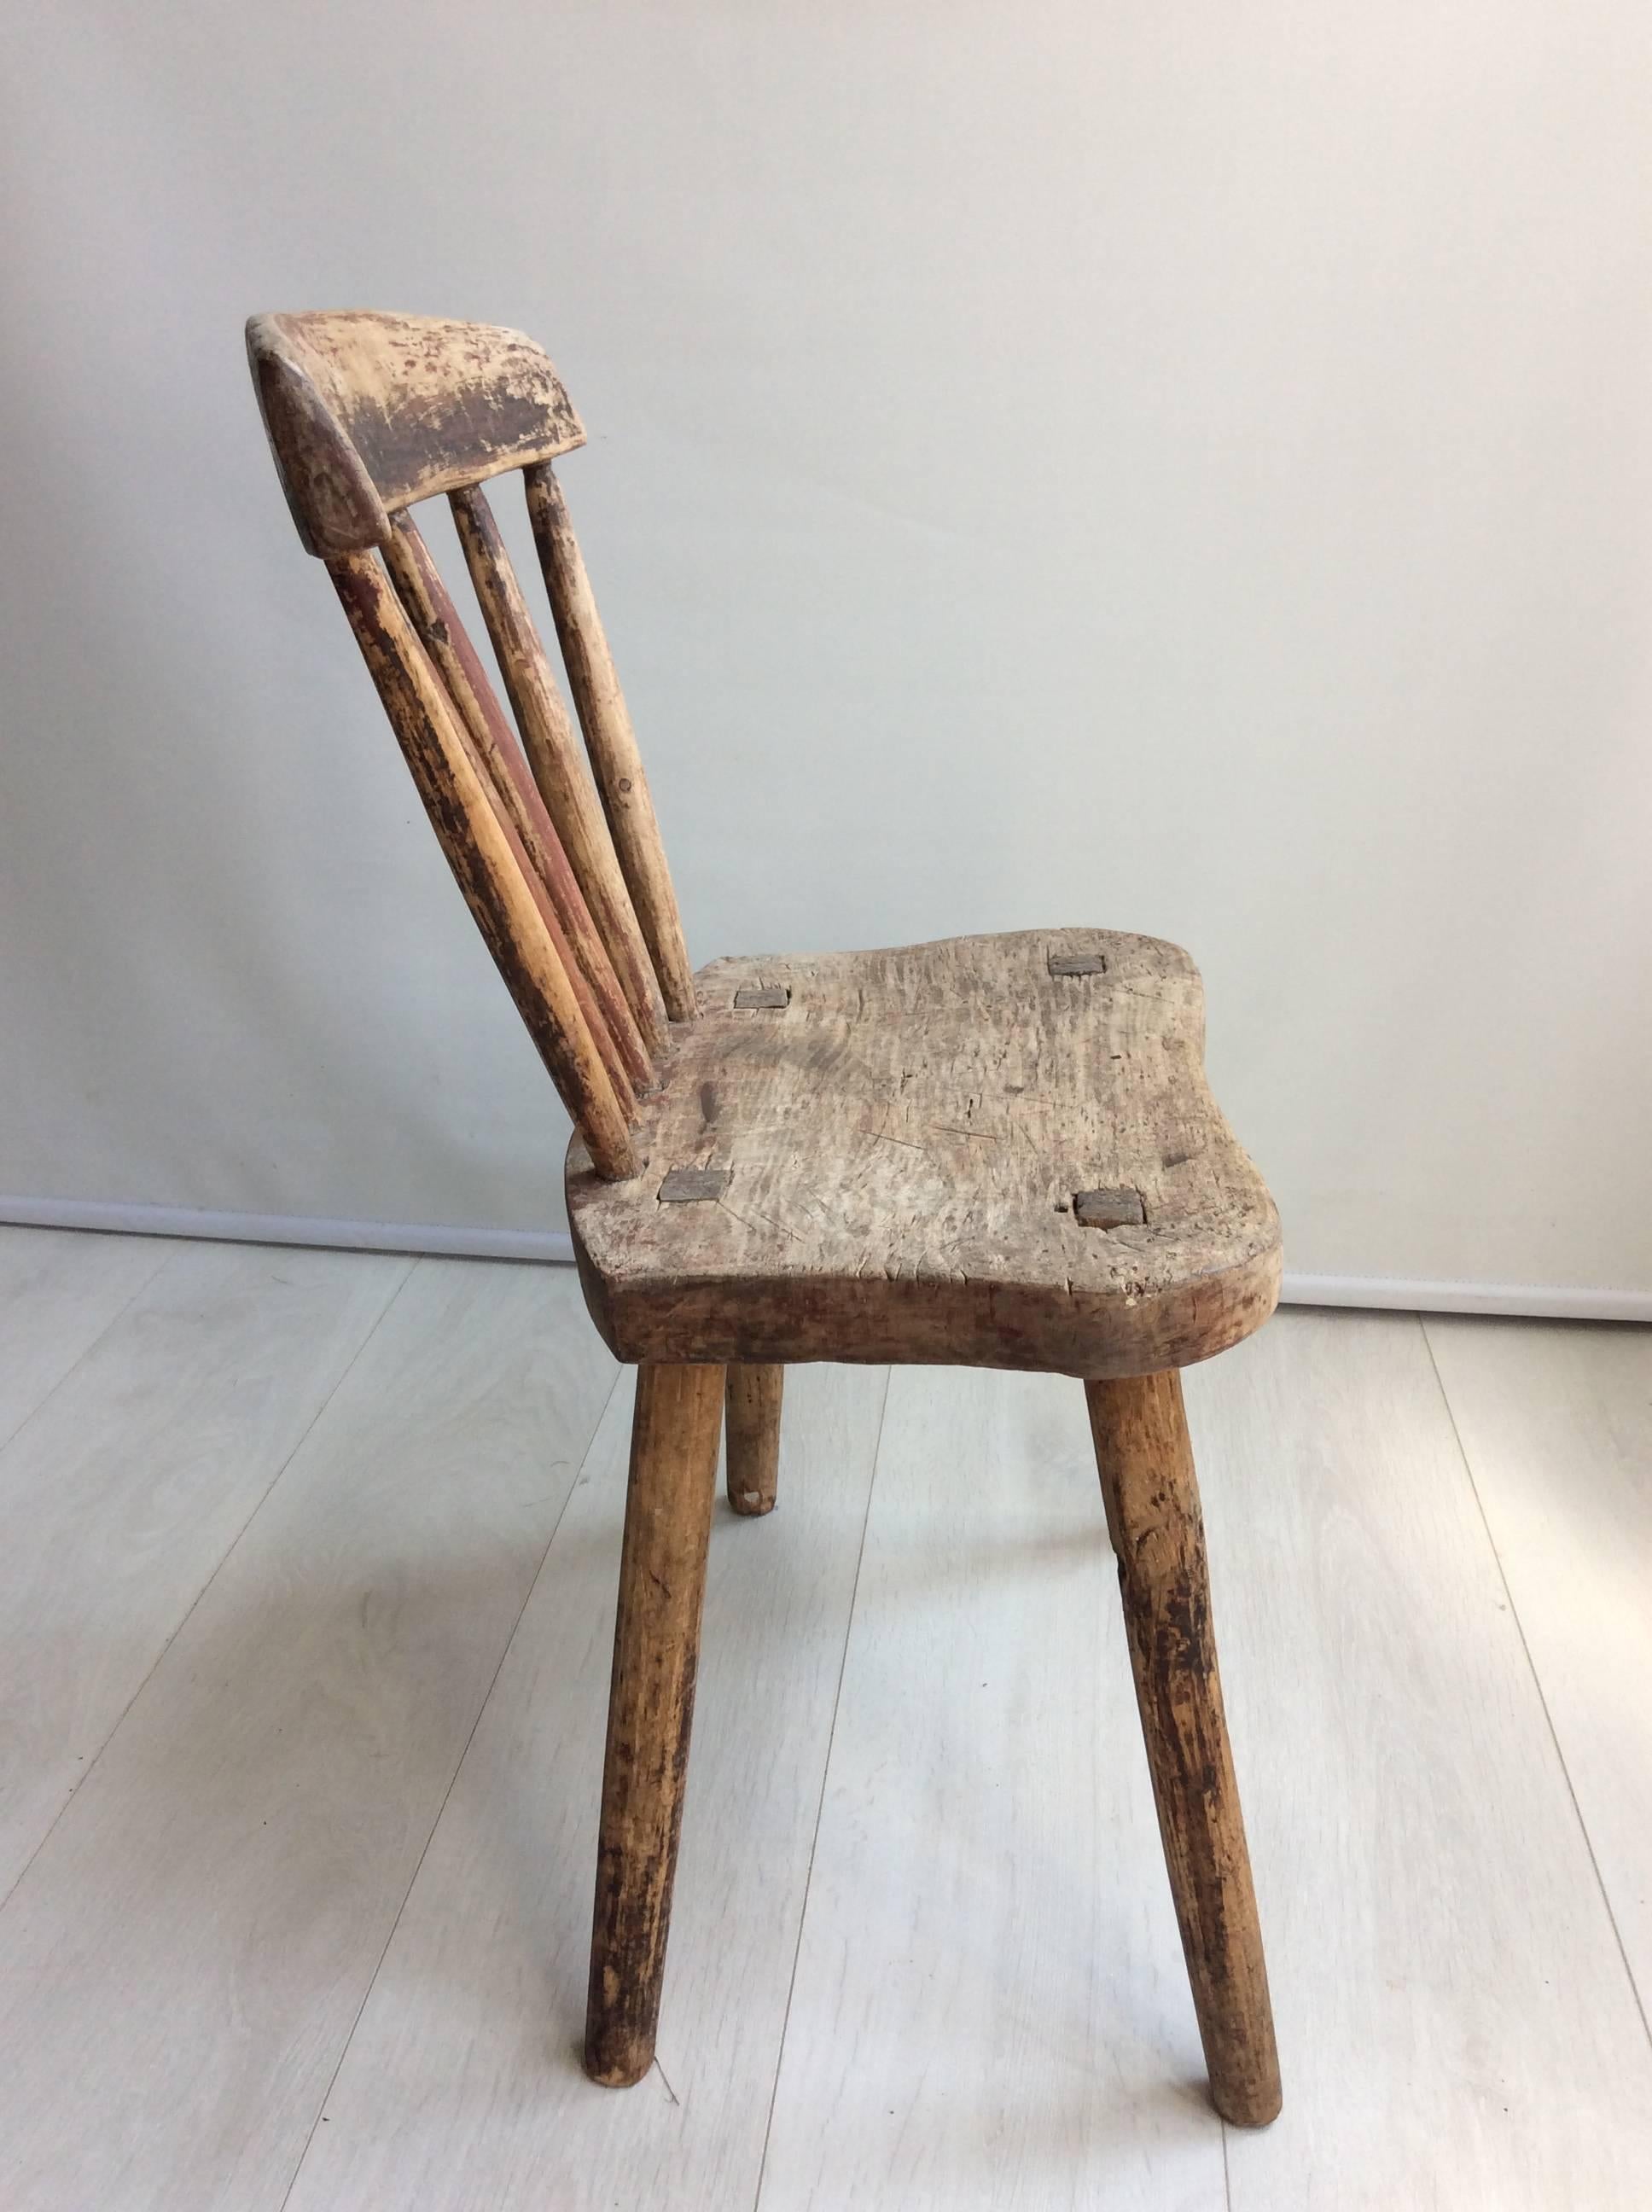 Primitive Swedish Wooden Chair from Dalarna For Sale 1